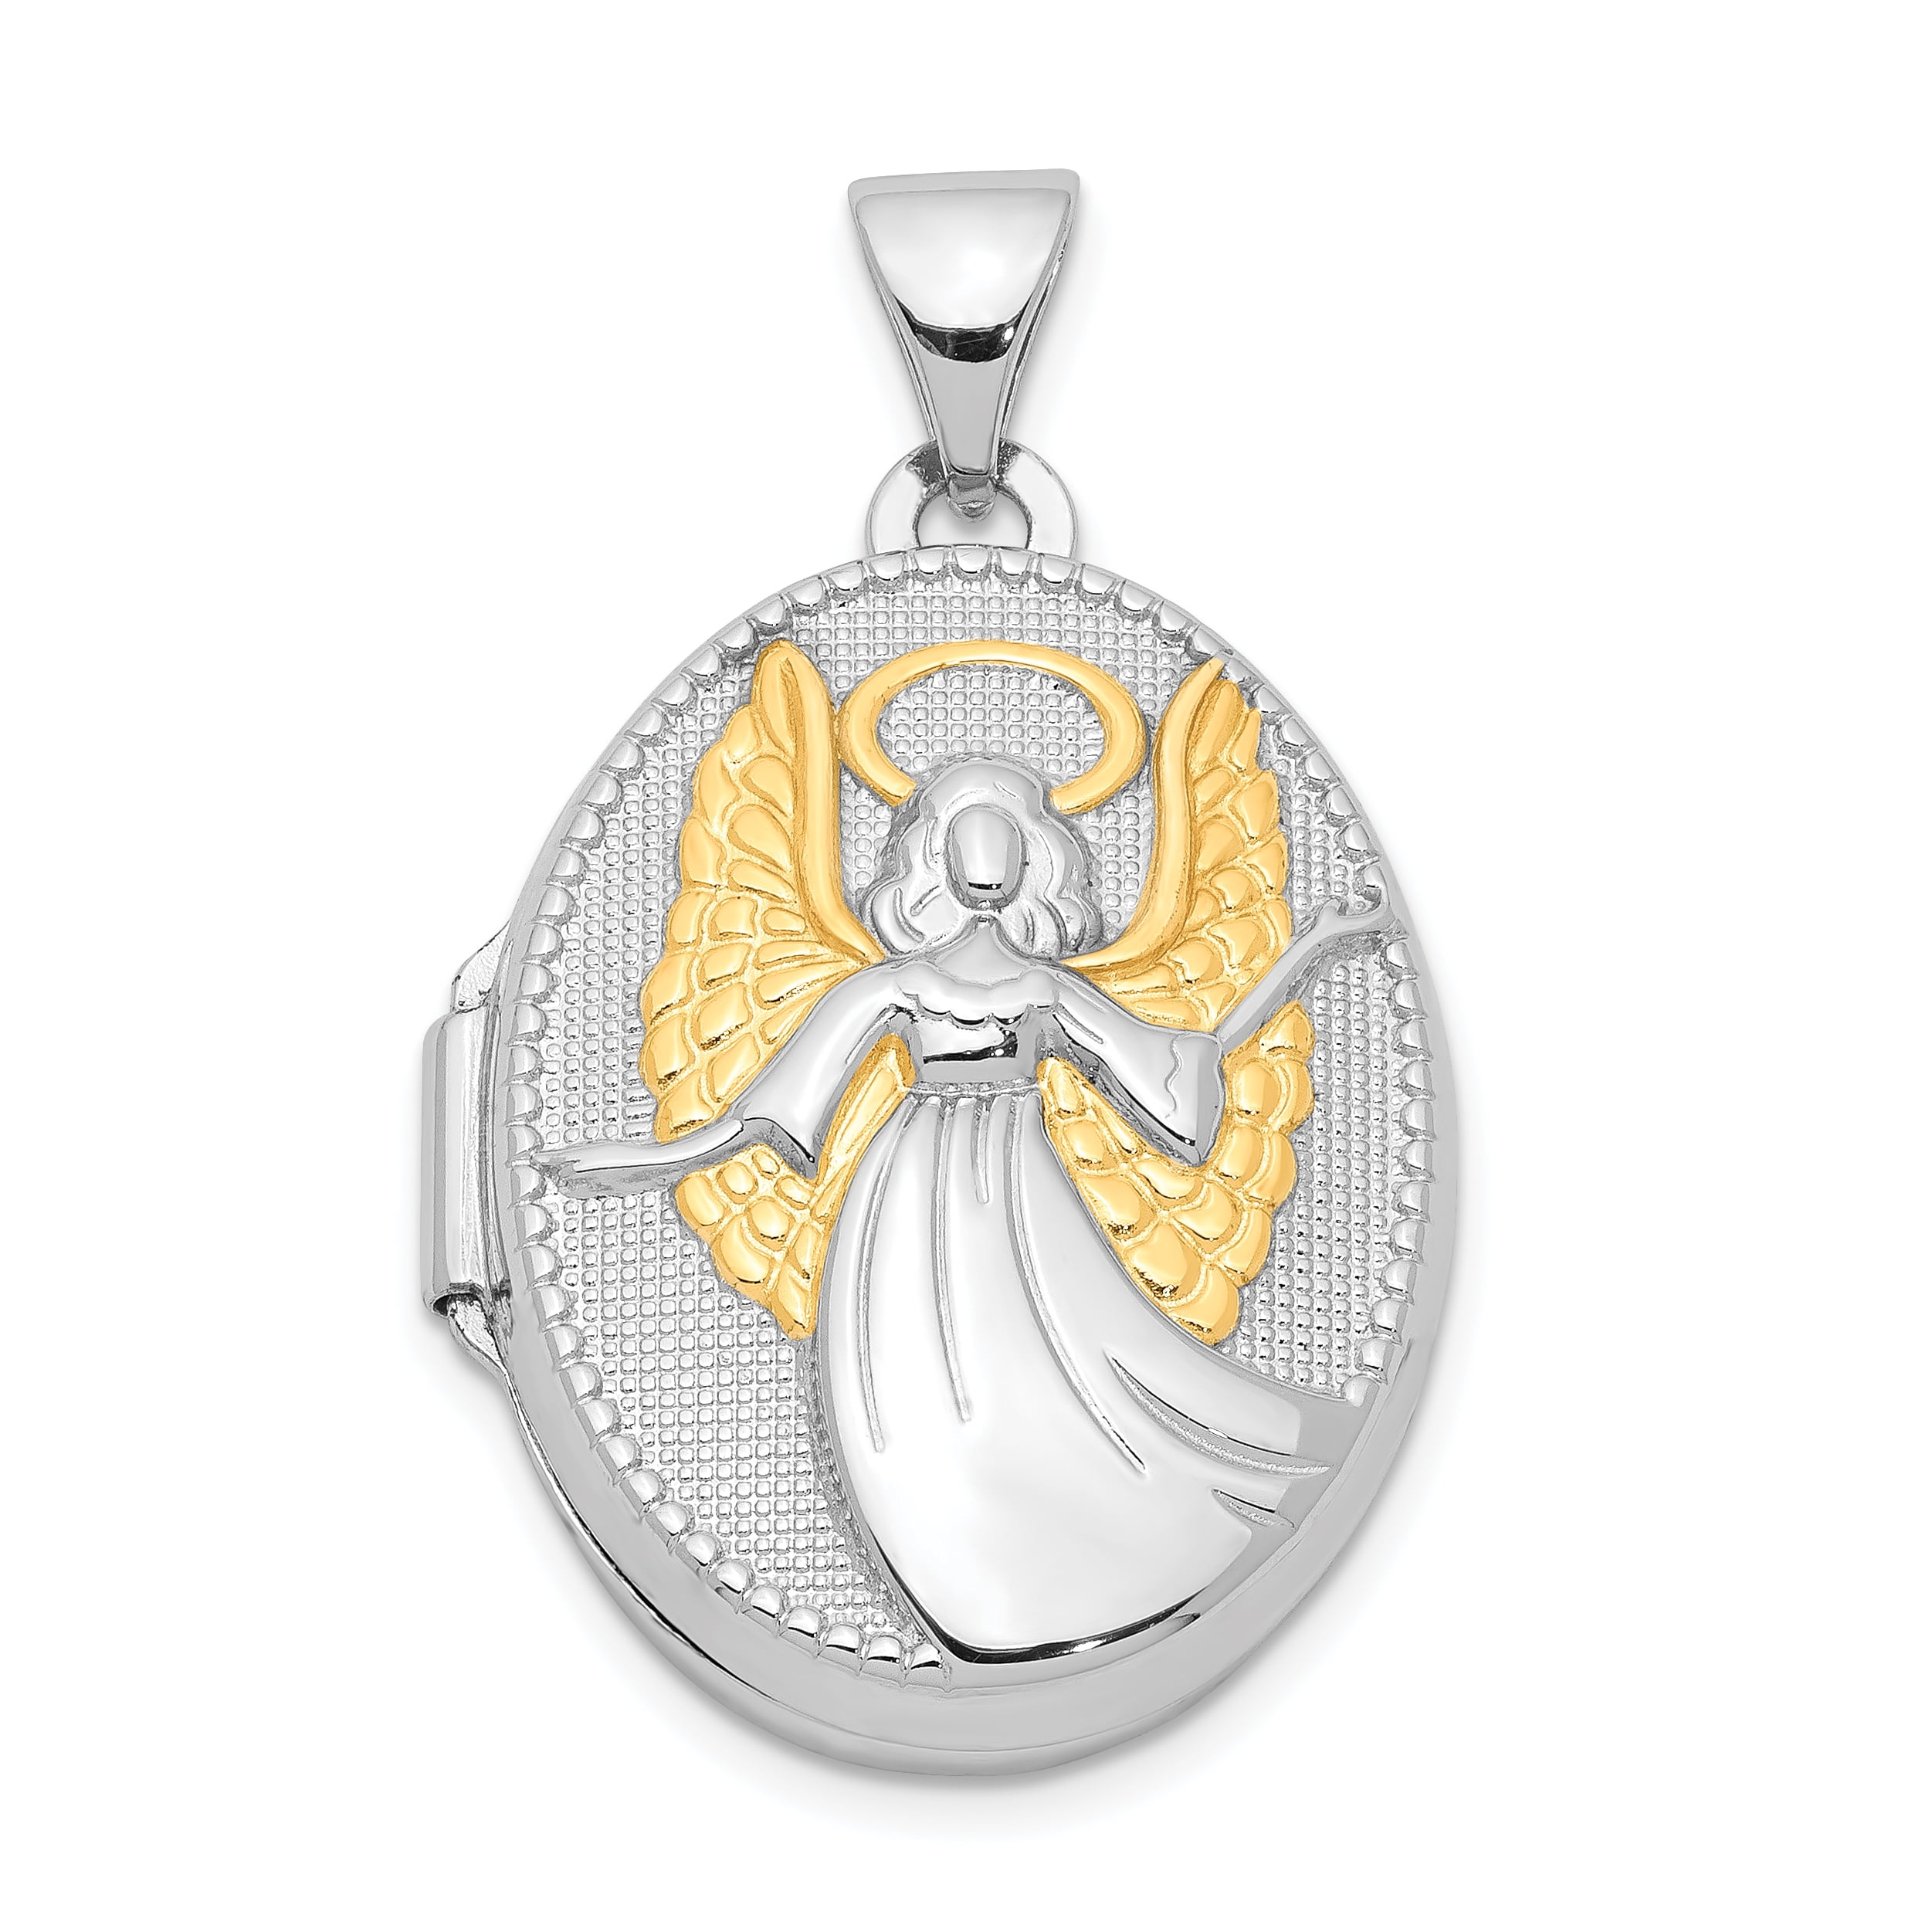 New Guardian Angel Gift Religious Cross White Gold Plated Chain Necklace Pendant 